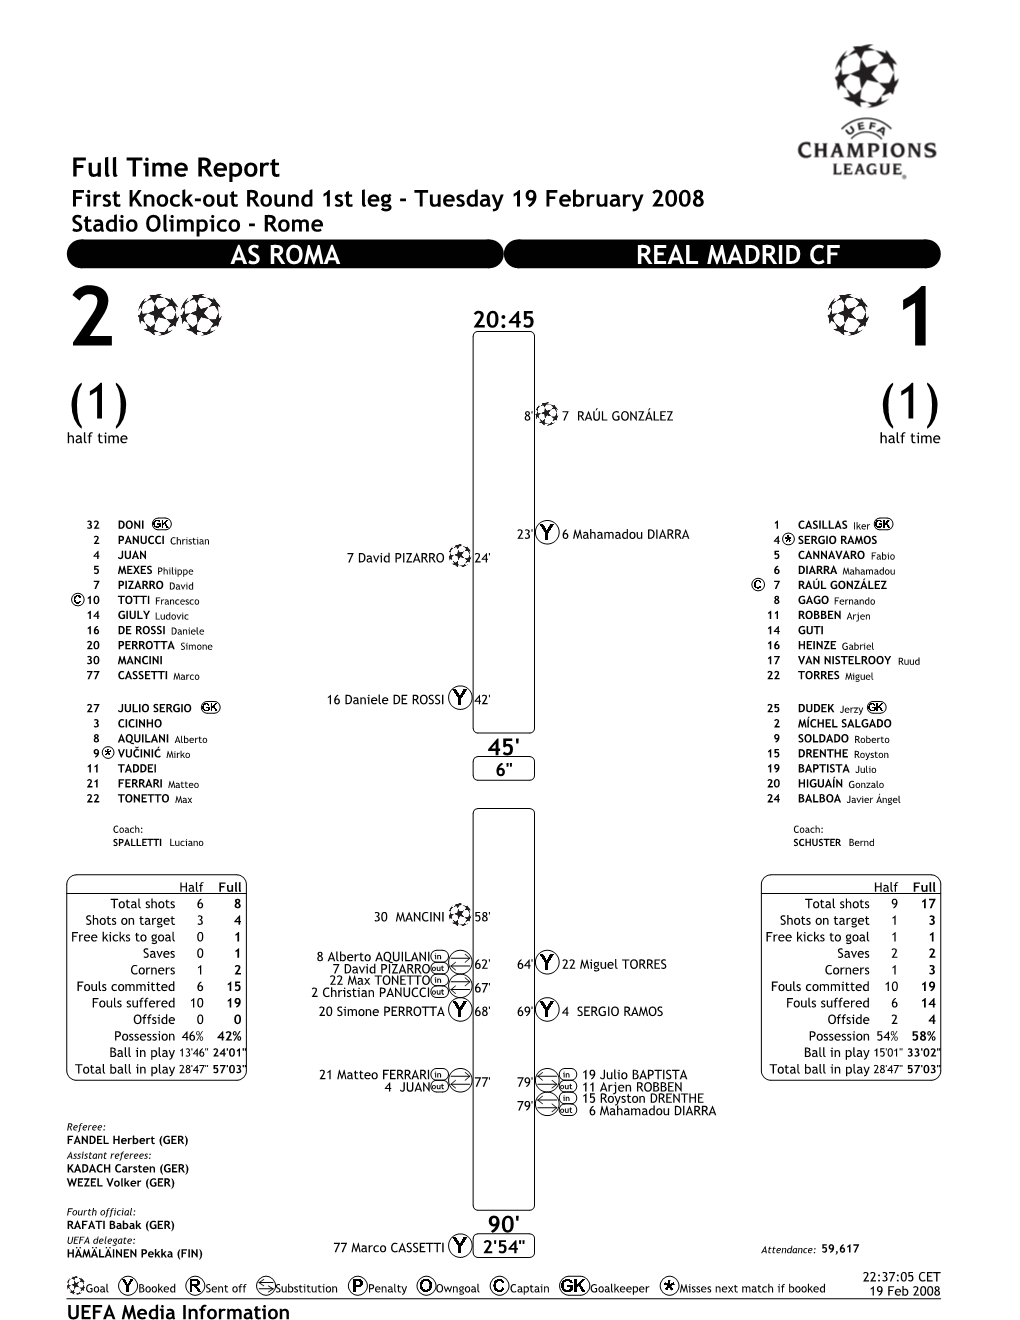 Full Time Report AS ROMA REAL MADRID CF